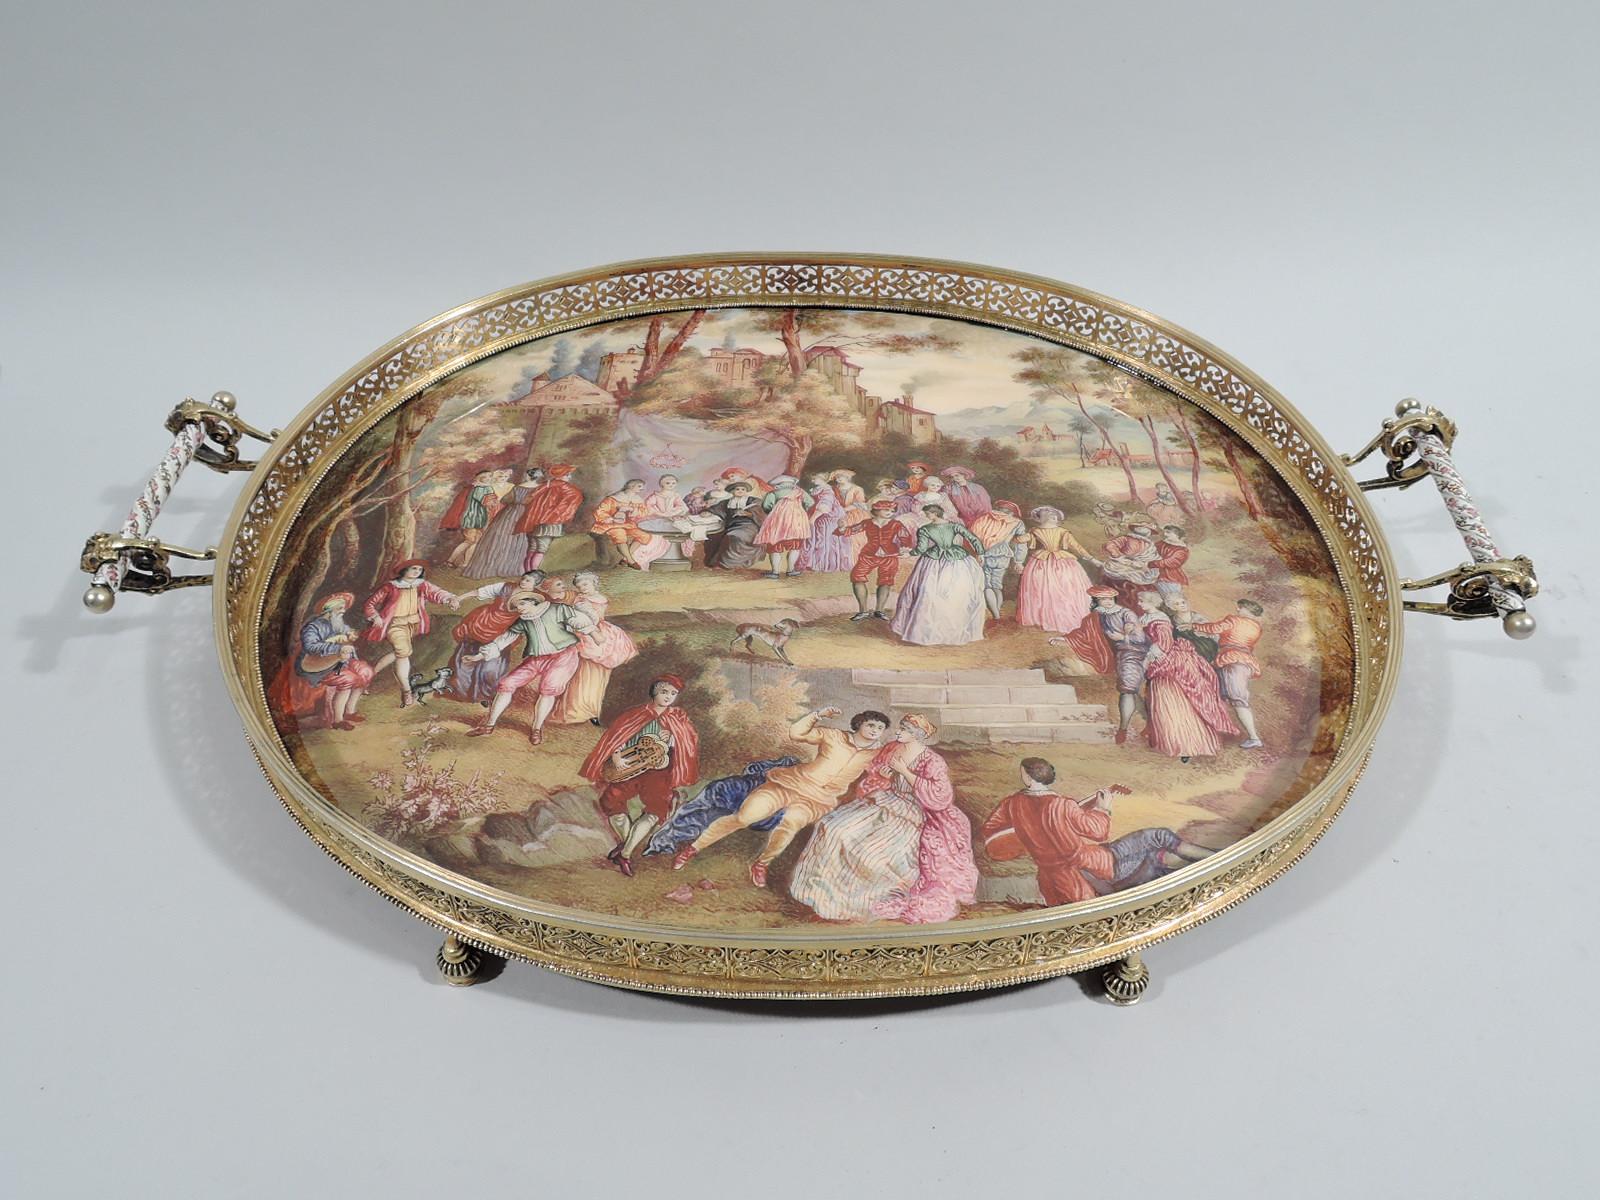 Austrian Rococo silver gilt and Viennese enamel tray, ca 1880. Oval enamel well depicting village green peopled with harp-strumming, minueting, love-making gentle folk. A flower wreath is suspended above a man and woman seated at a table with a